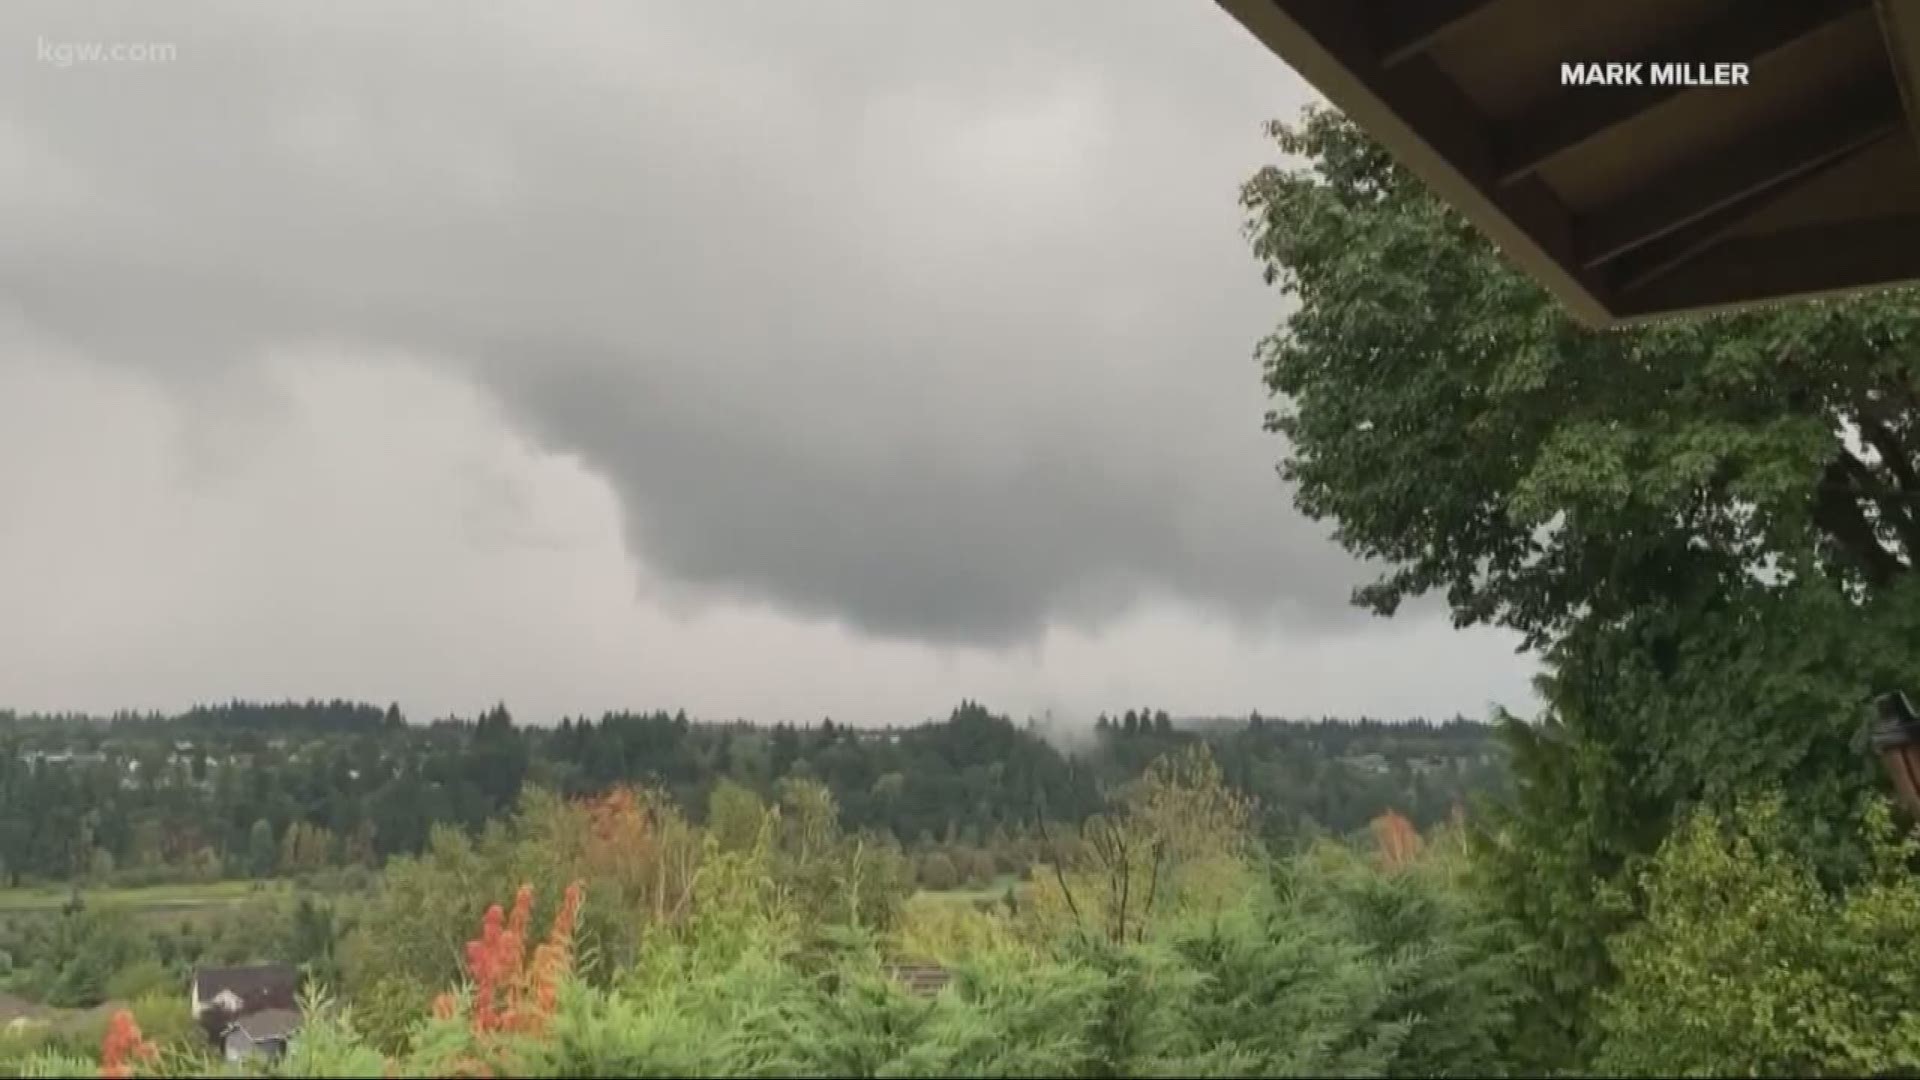 NWS Tornado touched down briefly Sunday night in NW Portland